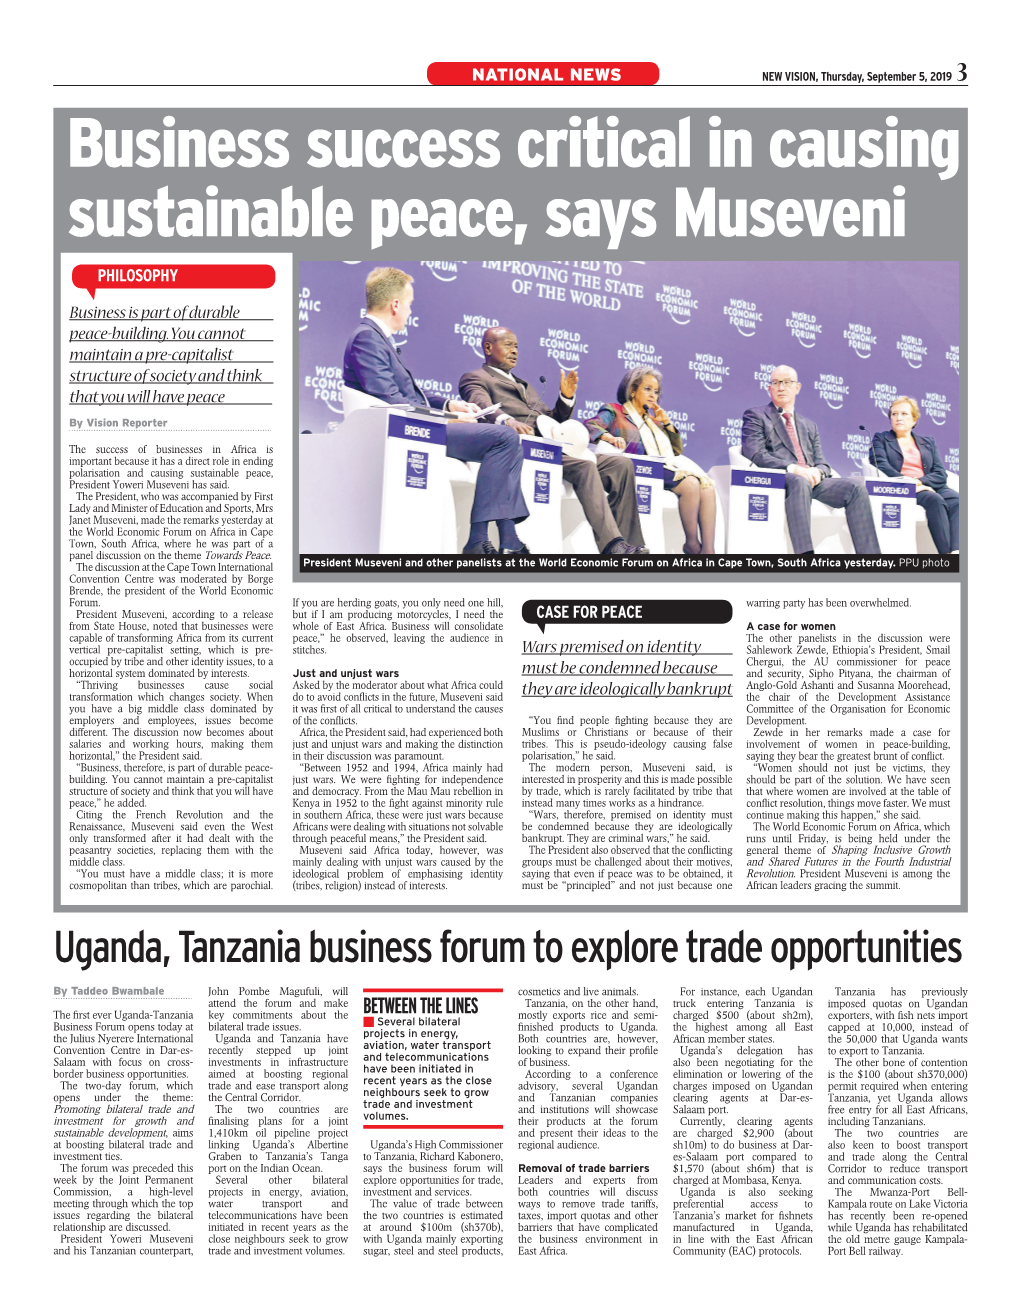 Business Success Critical in Causing Sustainable Peace, Says Museveni